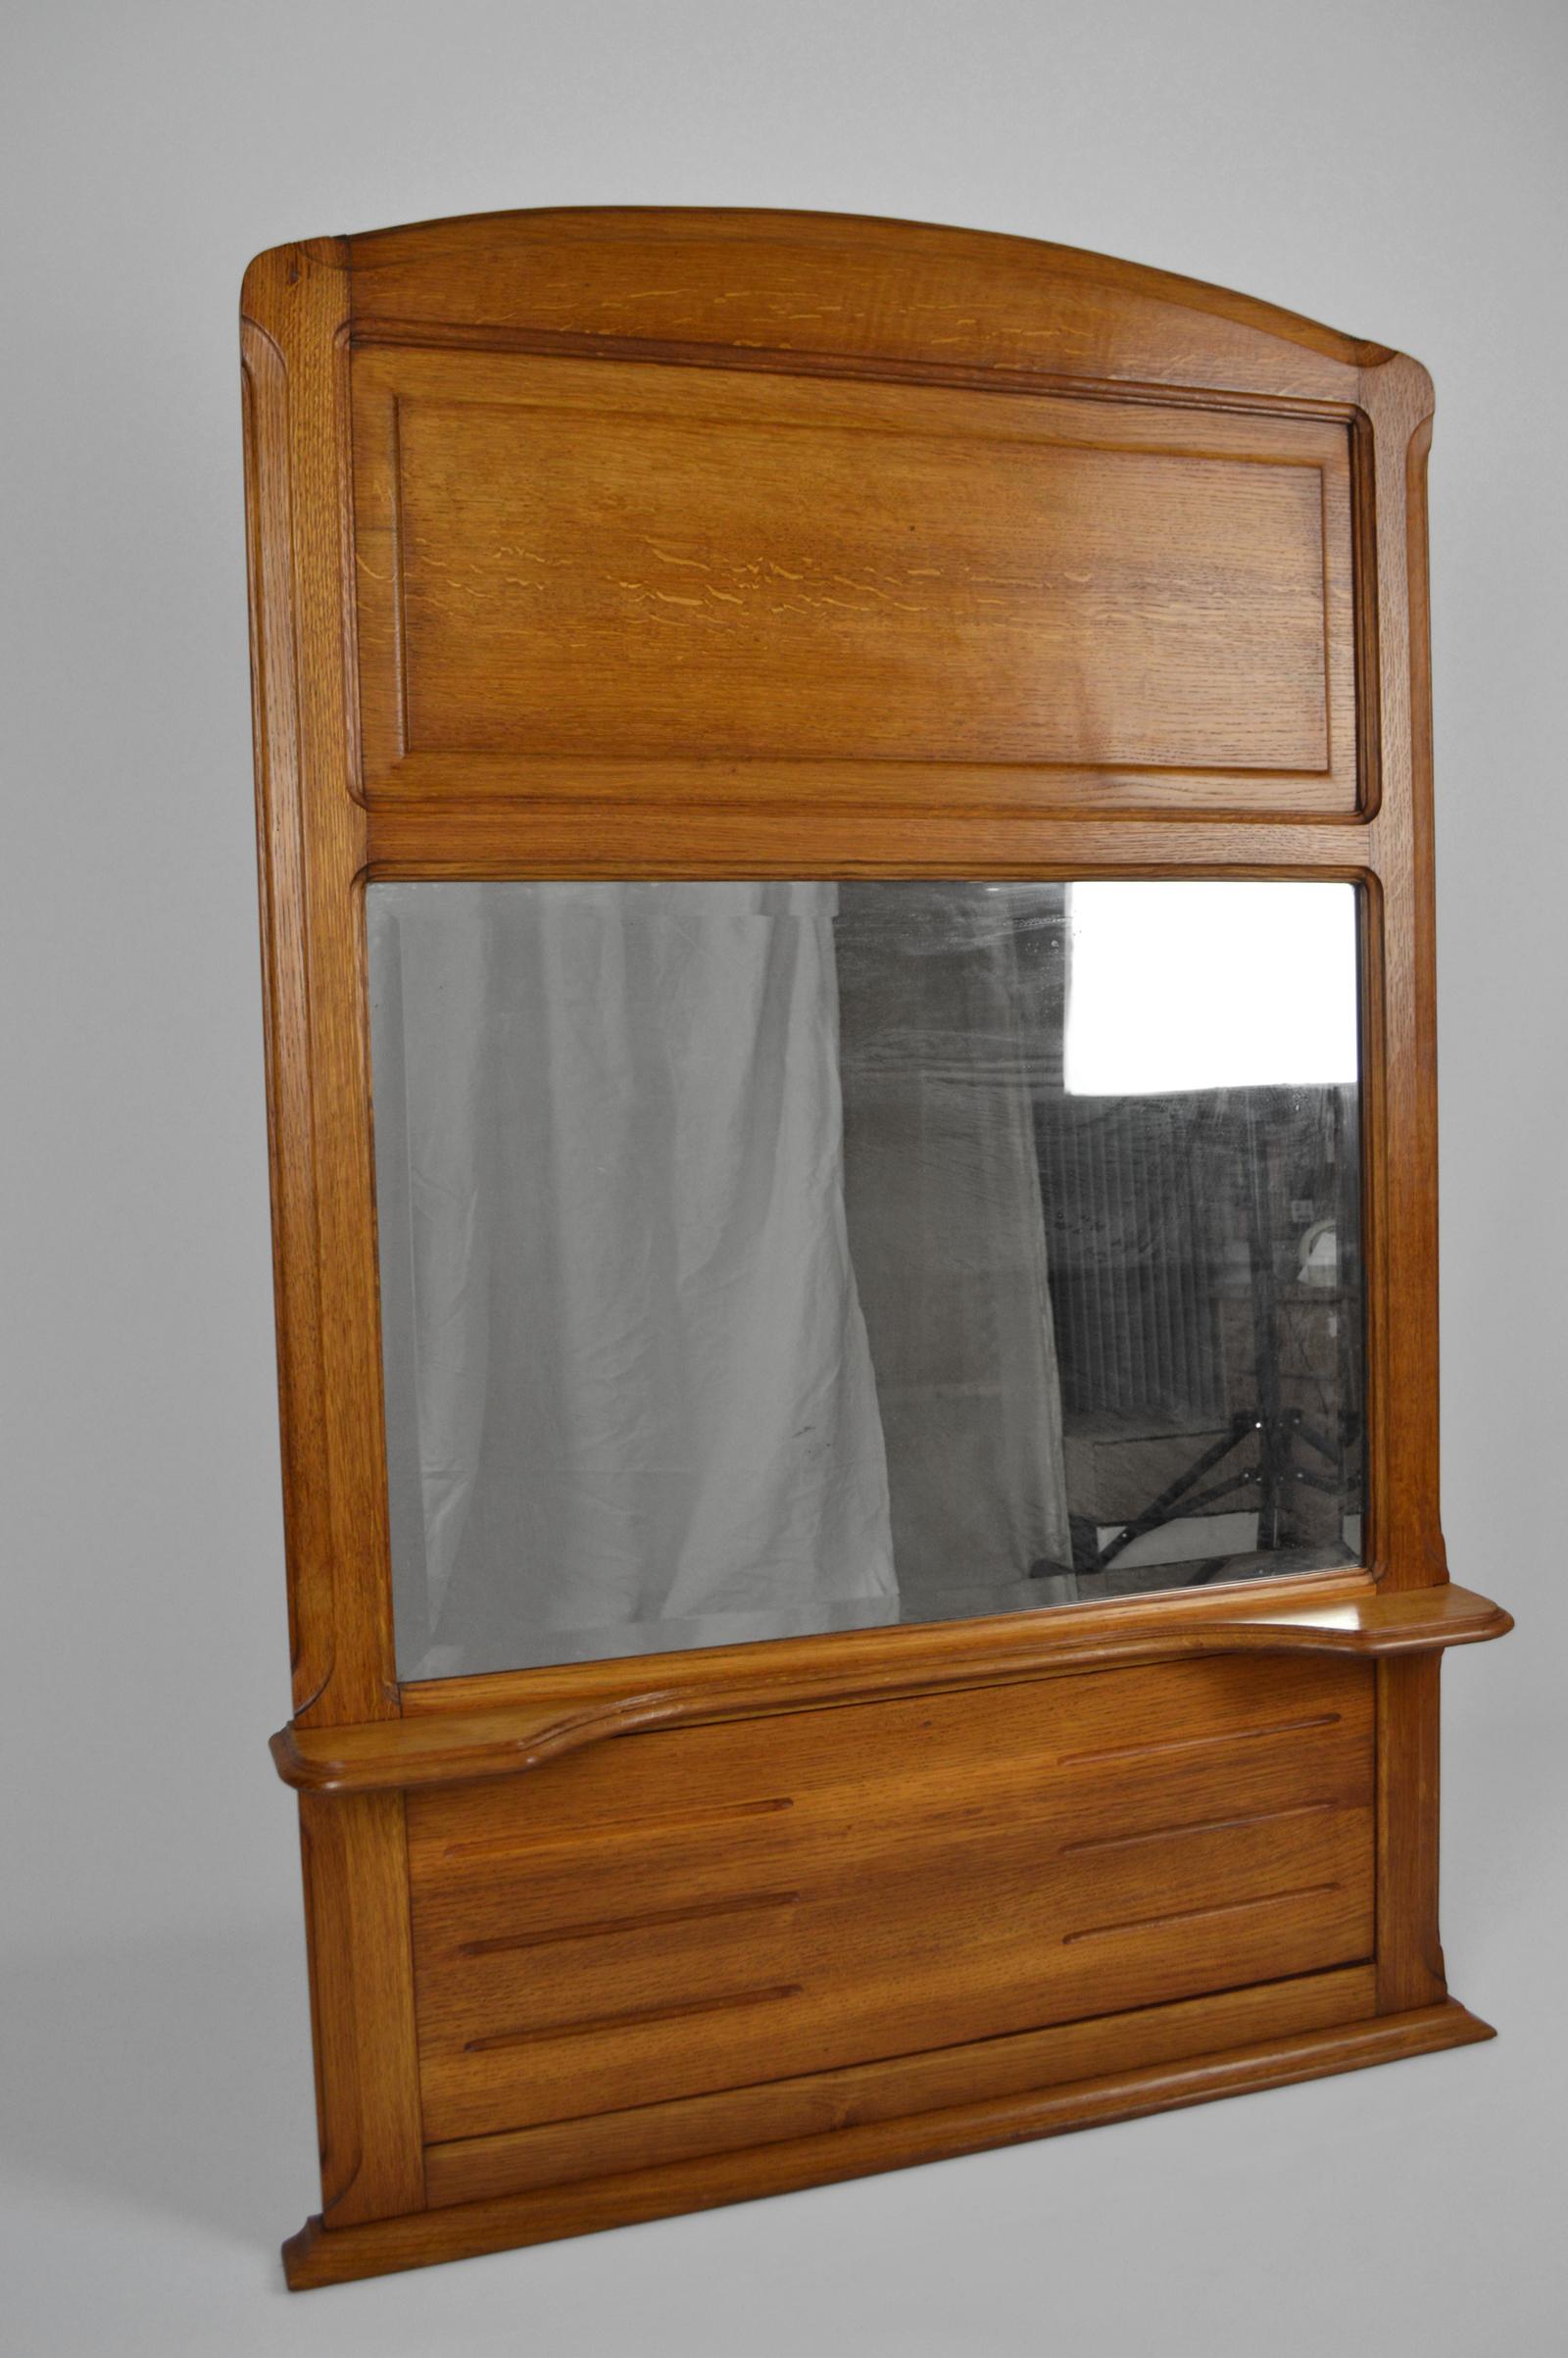 French Art Nouveau Fireplace Mirror in Oak, France, circa 1910 For Sale